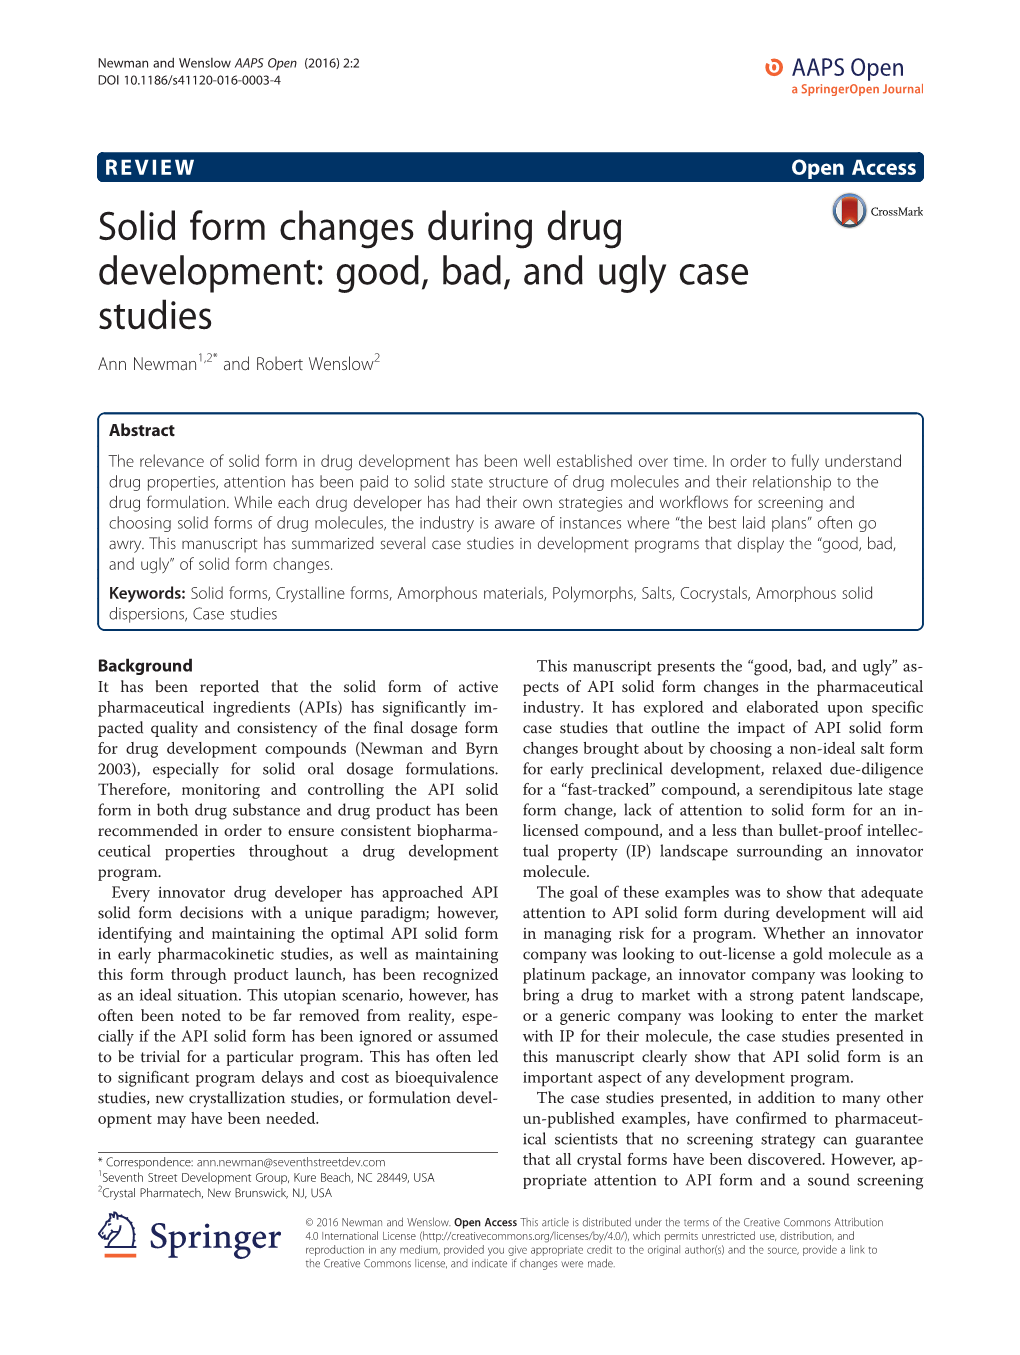 Solid Form Changes During Drug Development: Good, Bad, and Ugly Case Studies Ann Newman1,2* and Robert Wenslow2